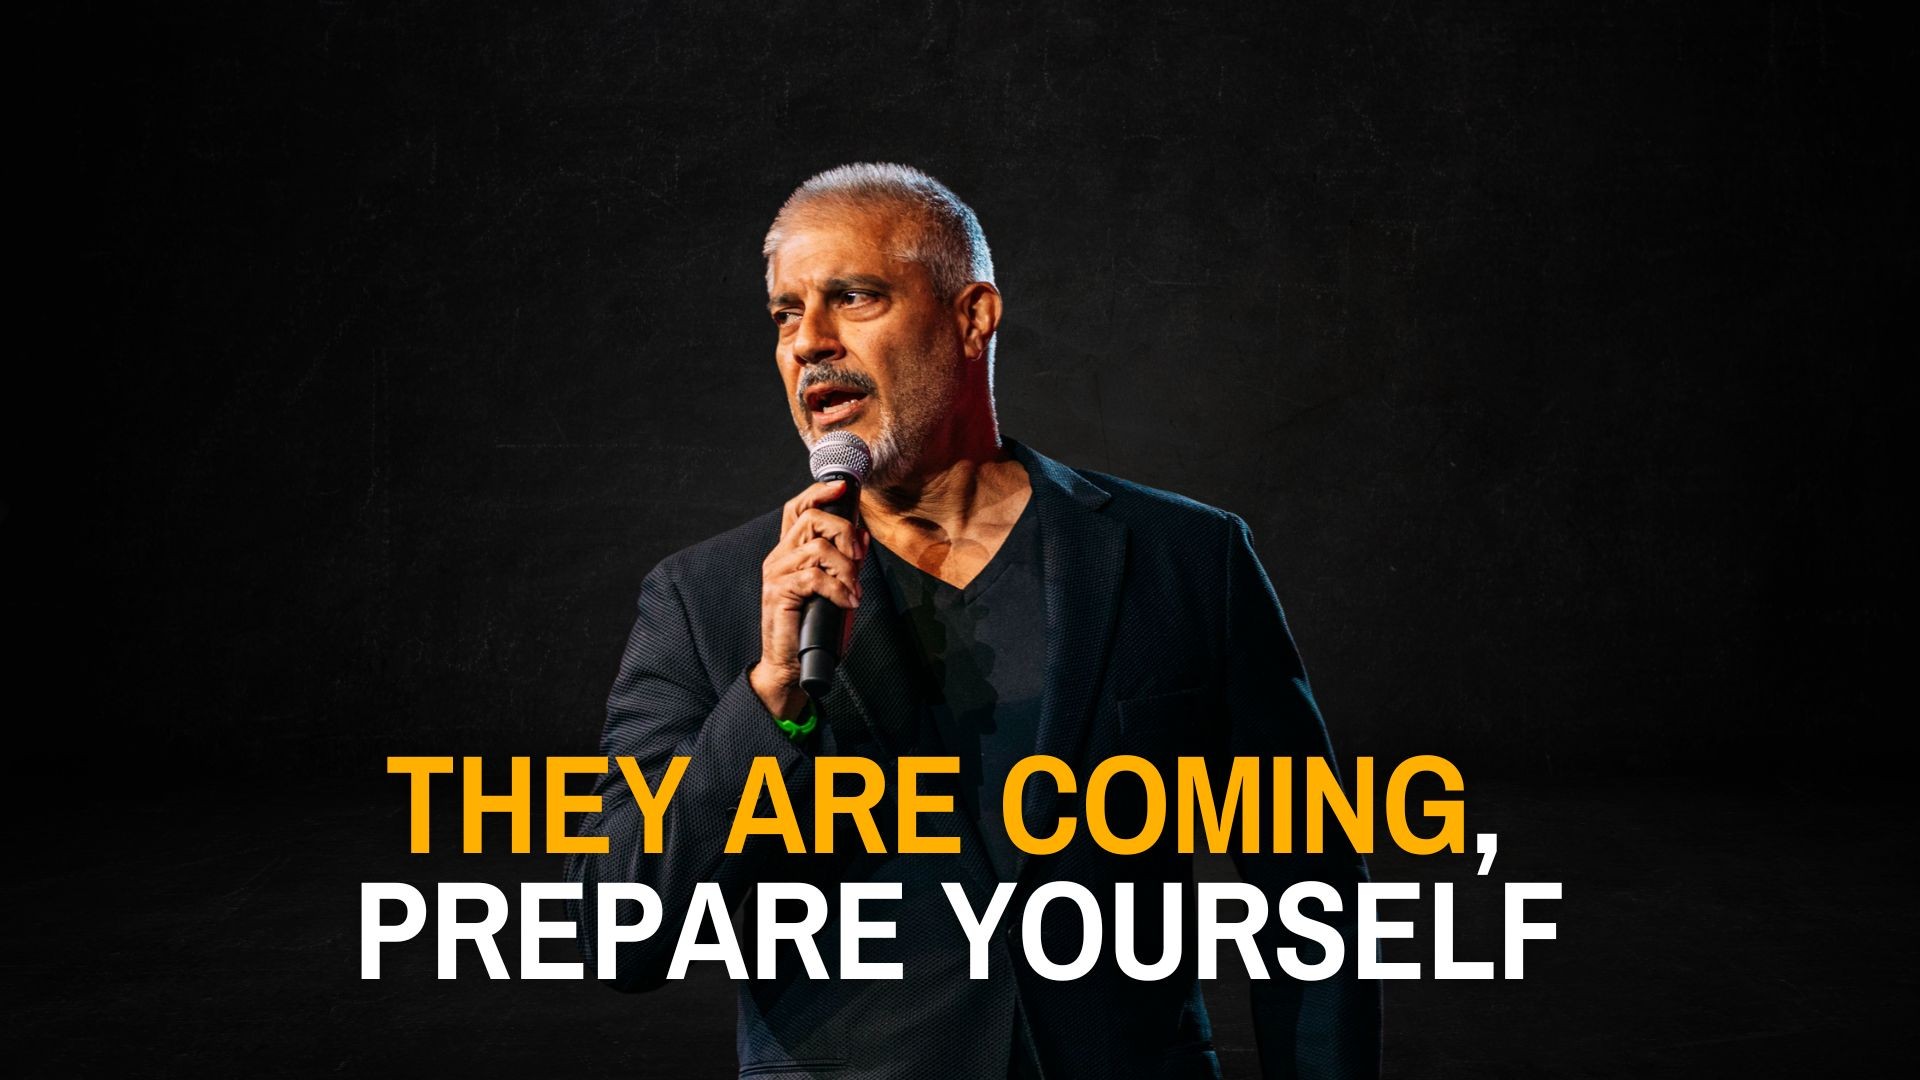 THEY ARE COMING, Don't Be Afraid. Just Get Prepared! - Dr Rashid A Buttar